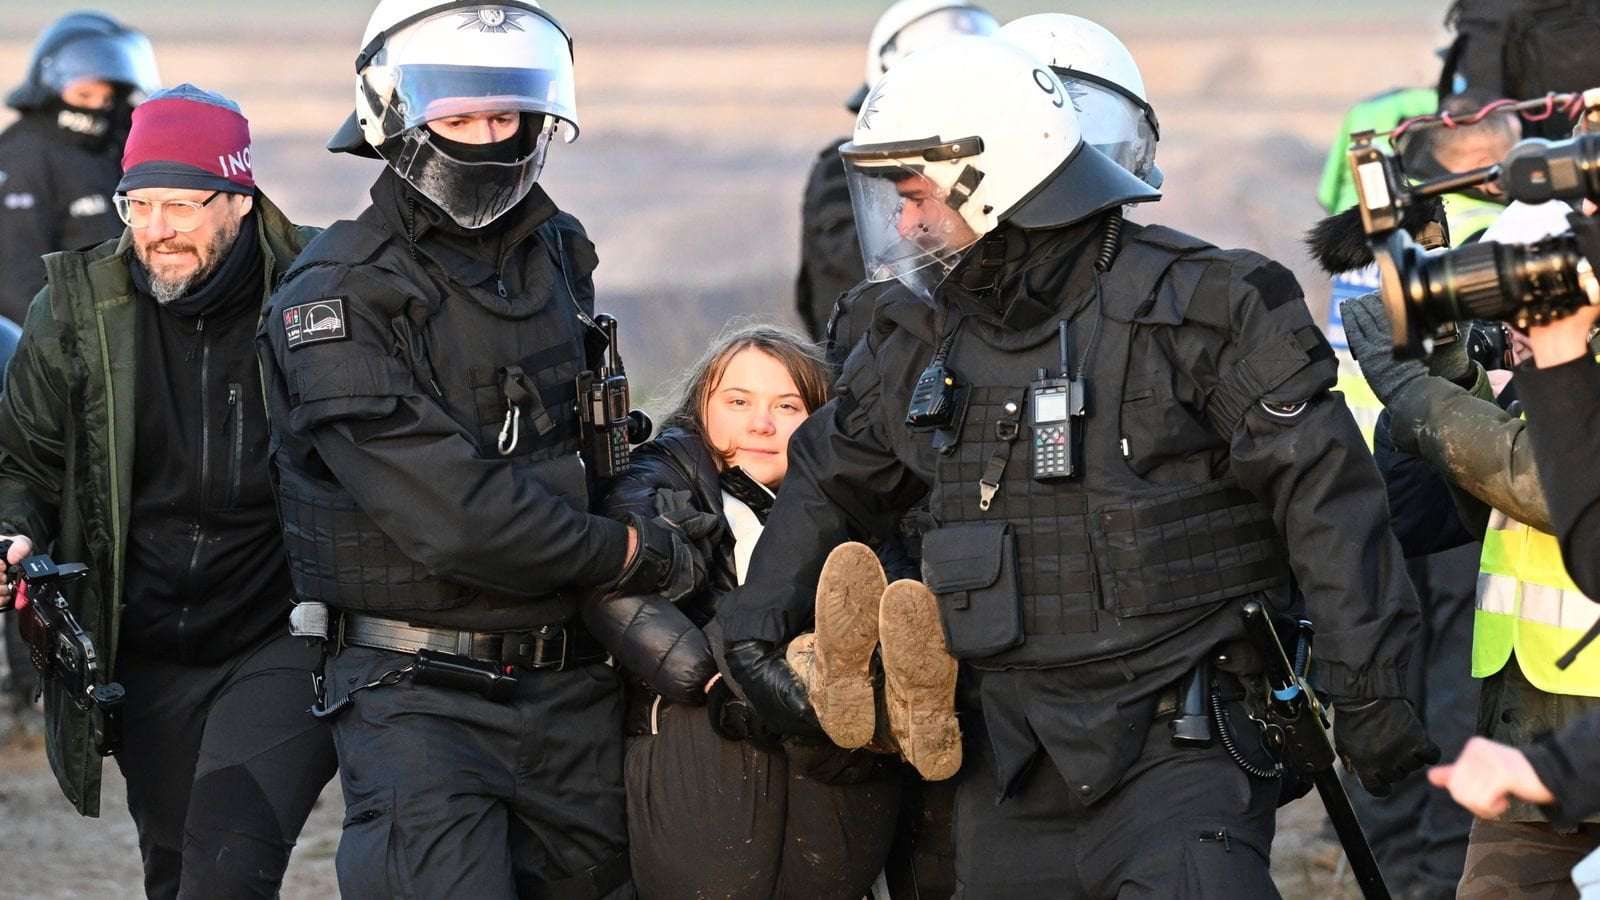 image for Greta Thunberg detained by police during eco protest in German village